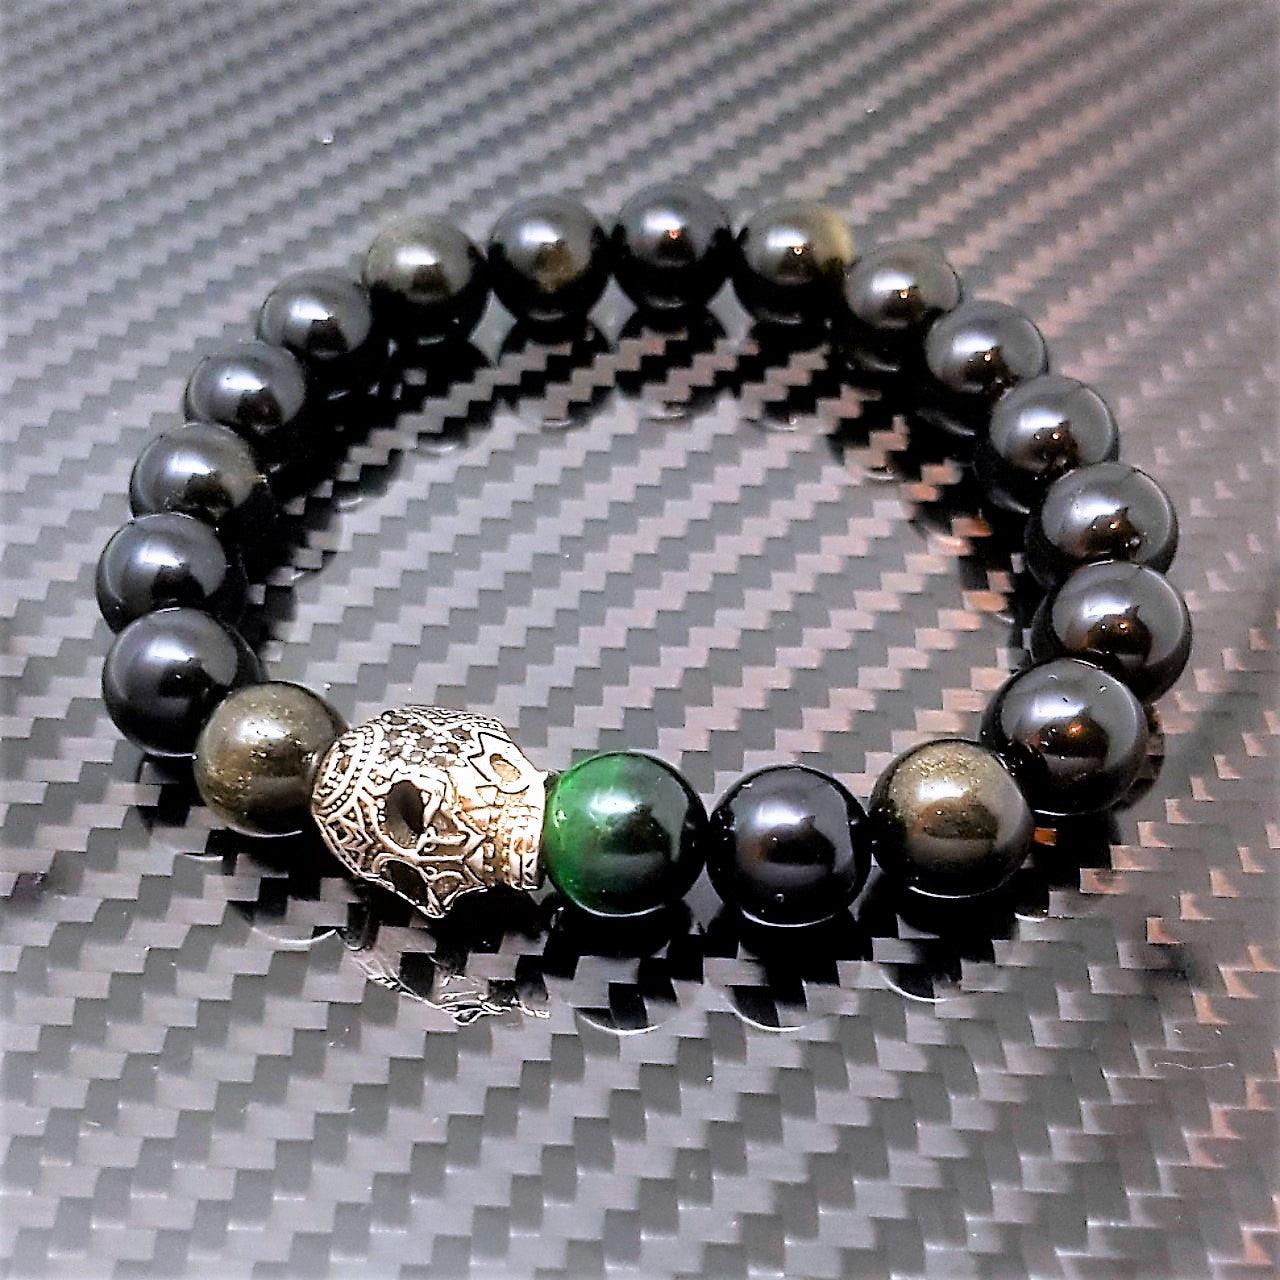 Theodore Gold Obsidian and Green Tiger Eye Skull  Bracelet - Theodore Designs